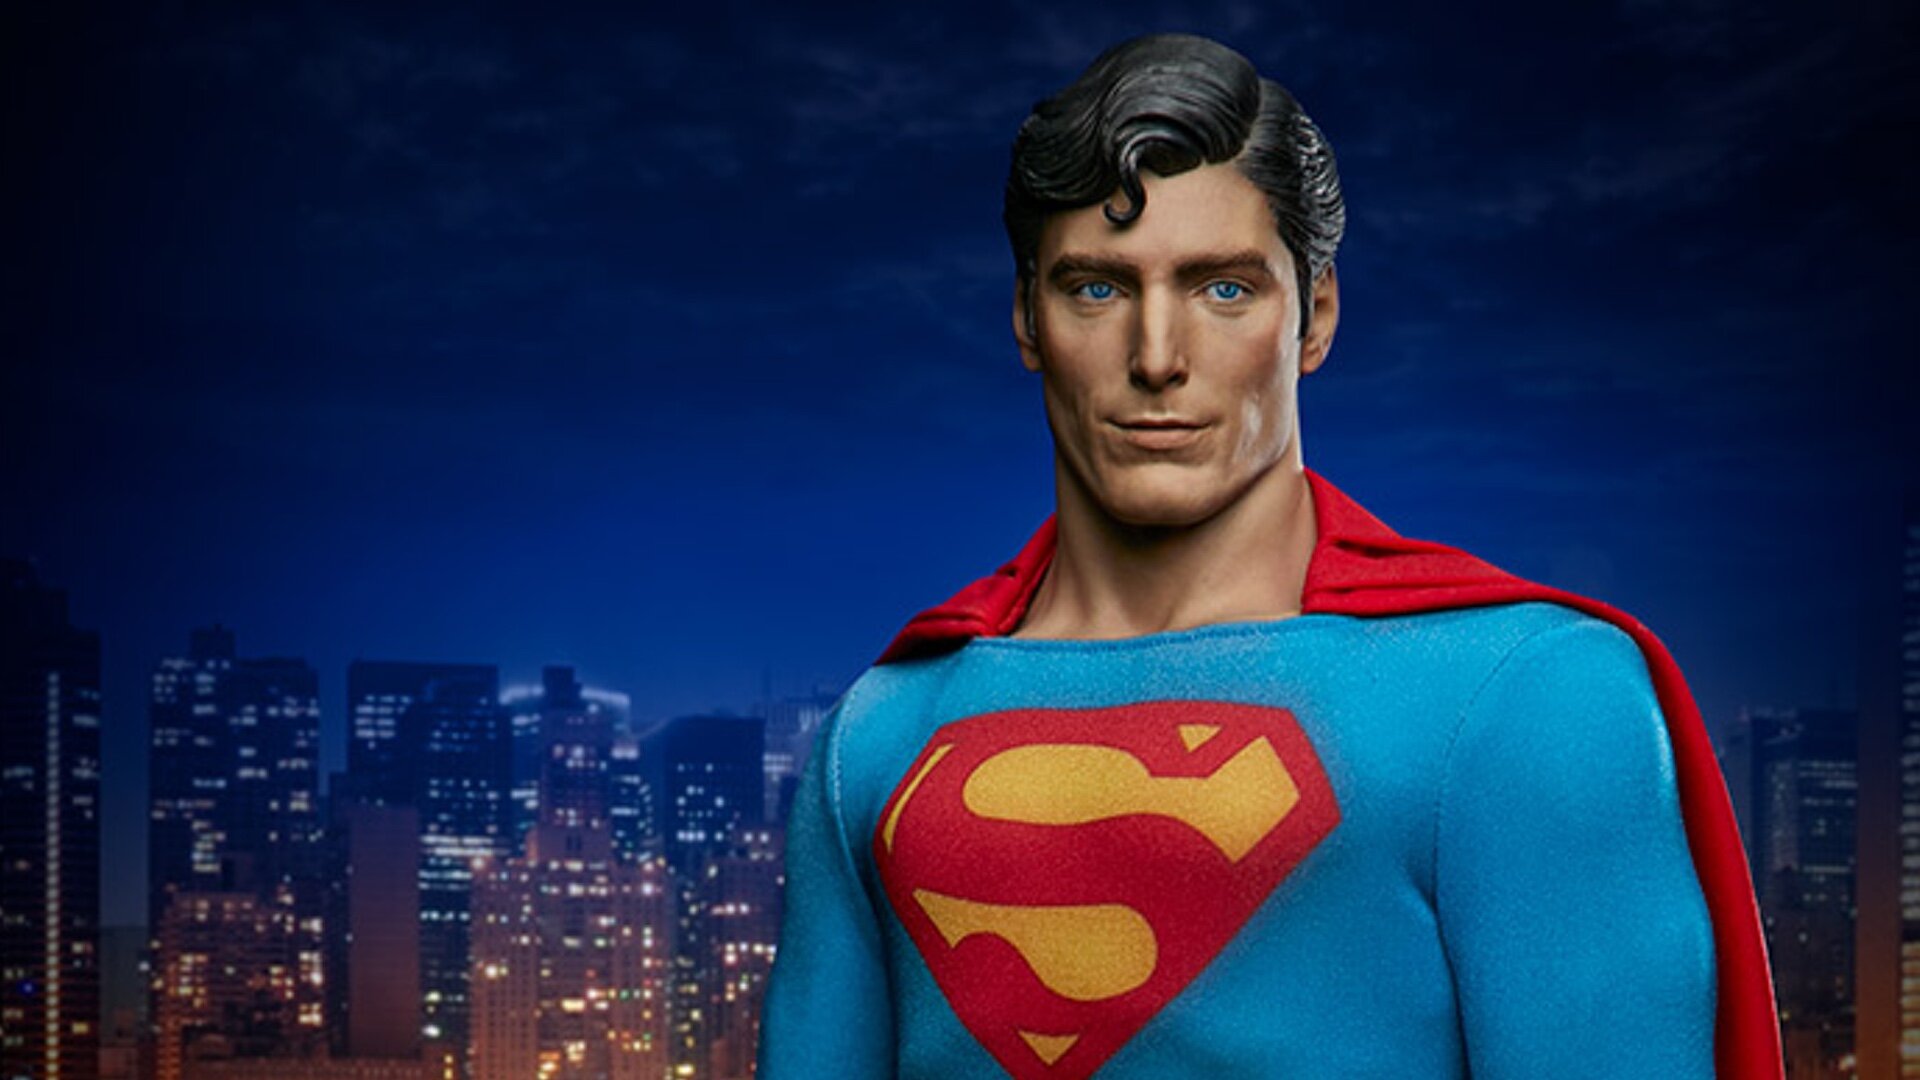 Christopher reeve